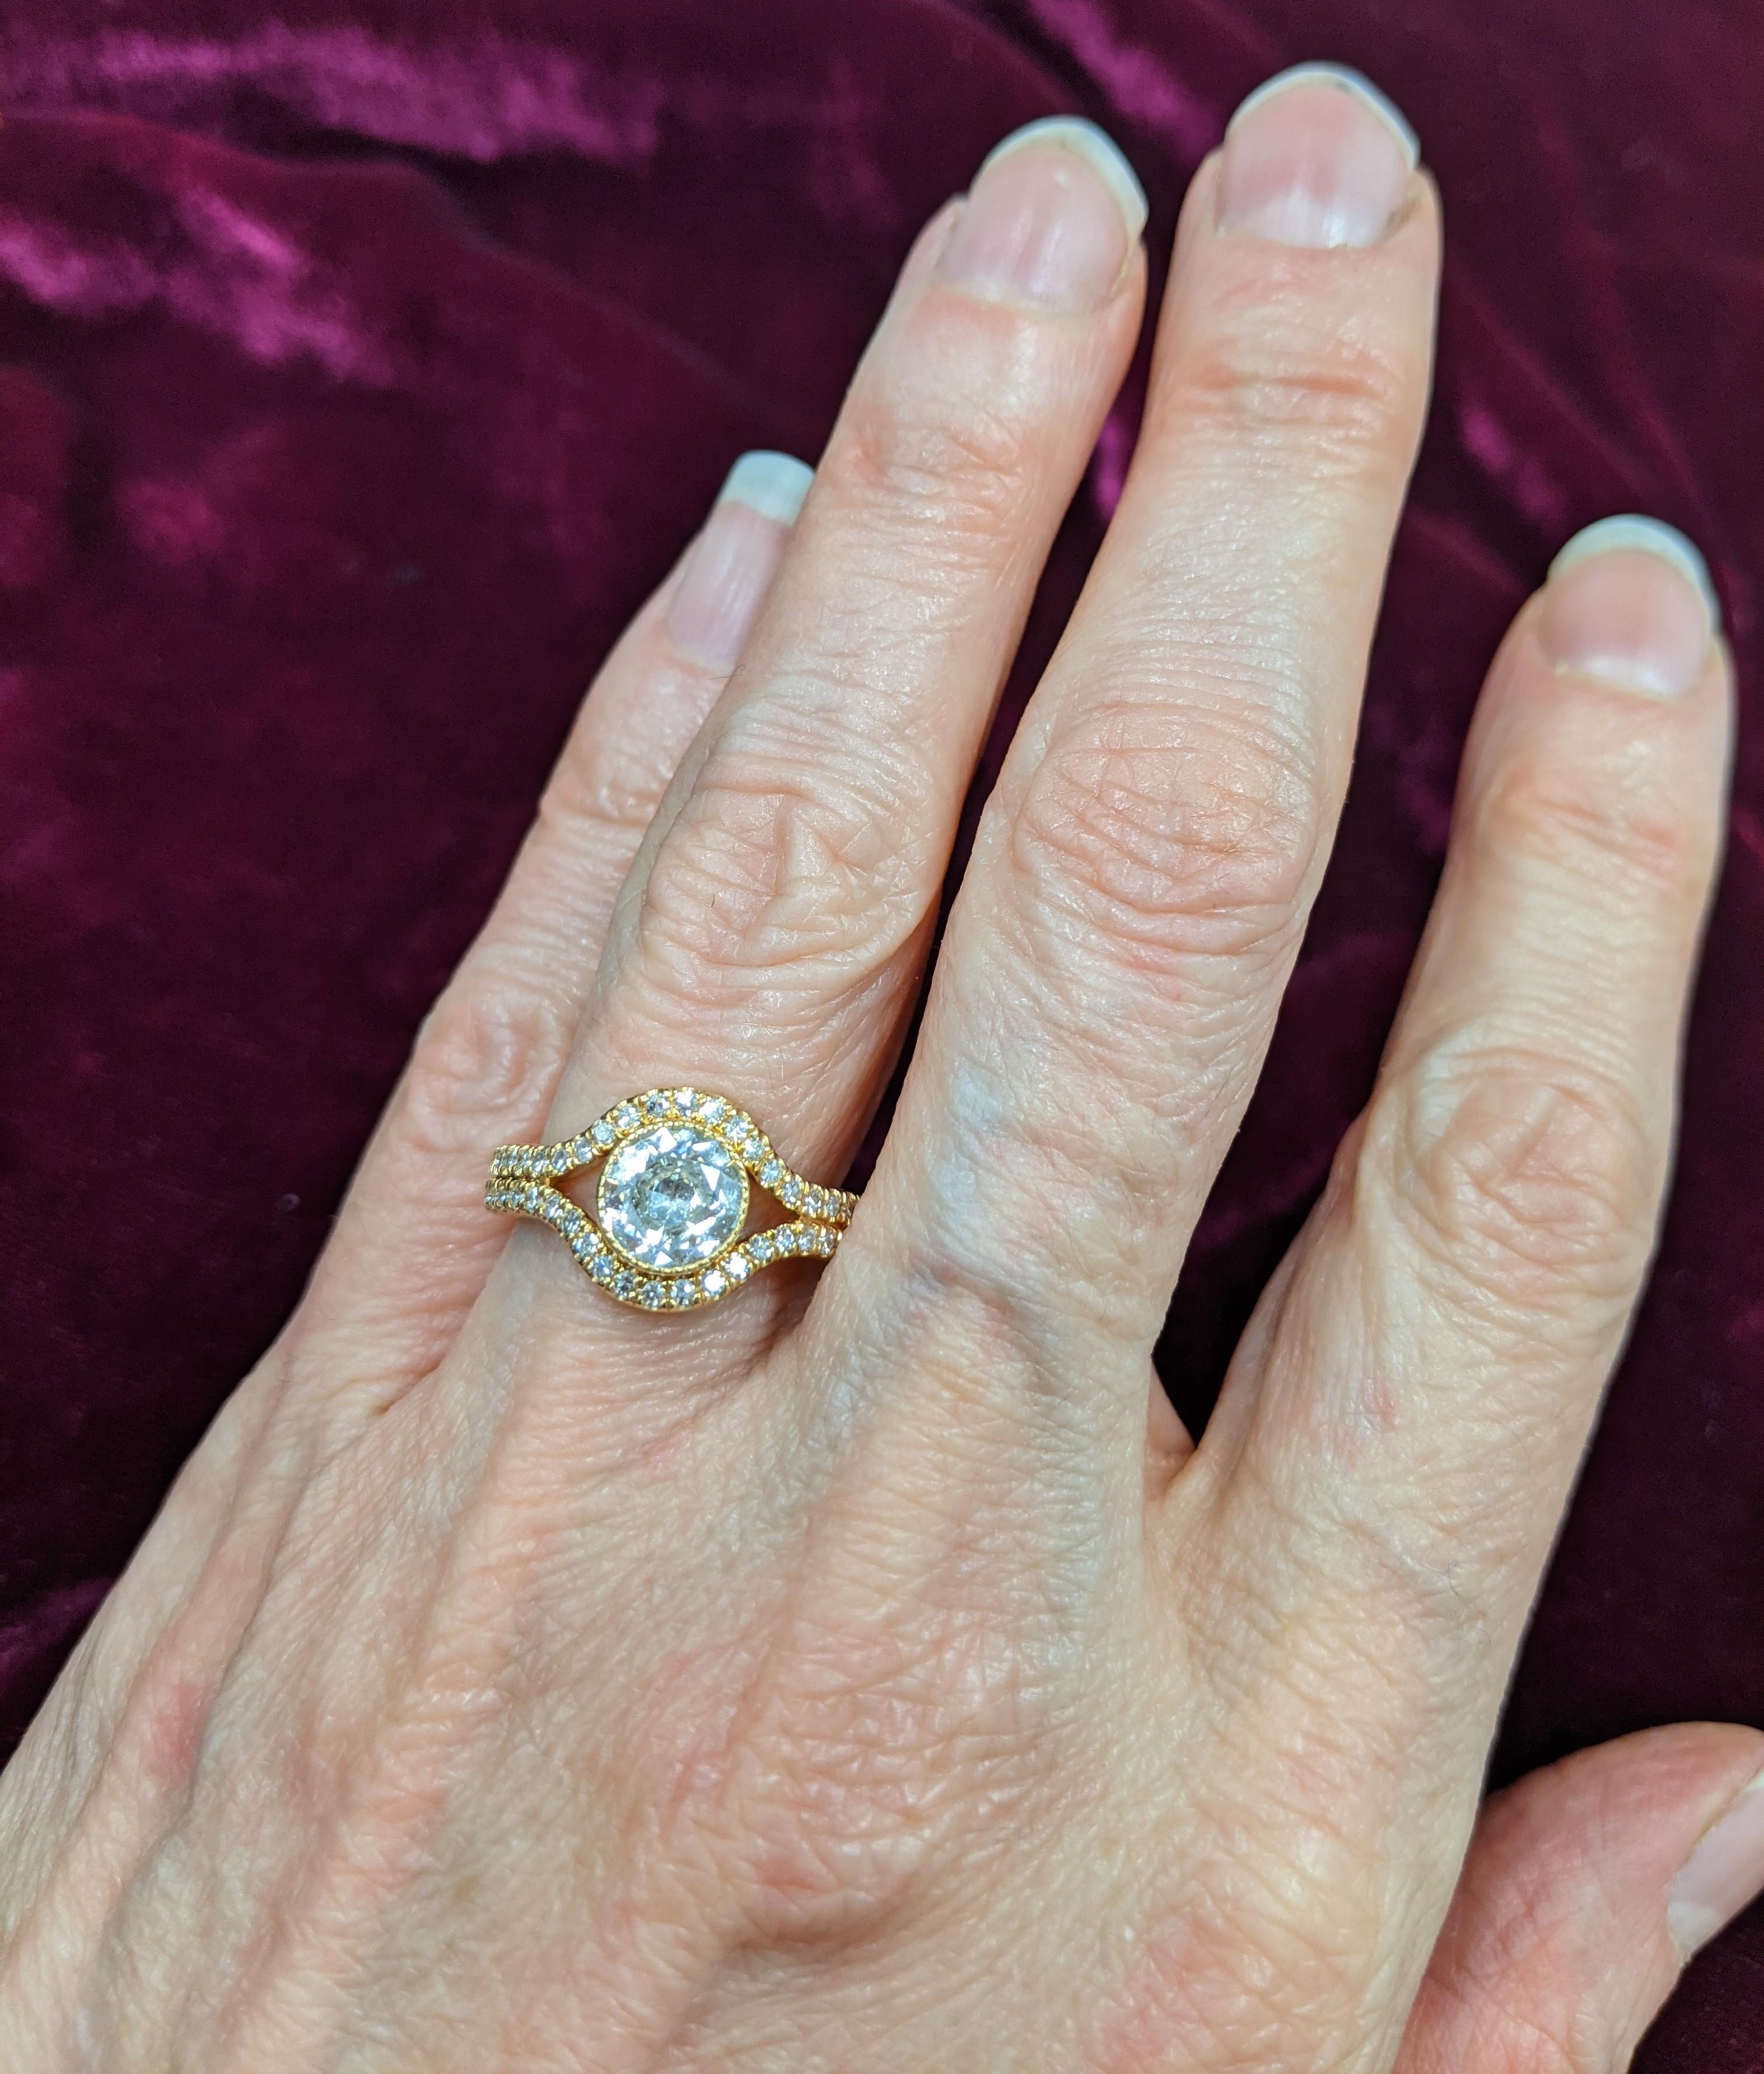 1.02 carat Old European diamond certified as a J color SI-2 clarity (and eye clean to boot!) by GIA.  It sits in an 18KT rose gold mounting.  This ring is a single split shank, but the split allows the diamond to sit in between each shank with 54